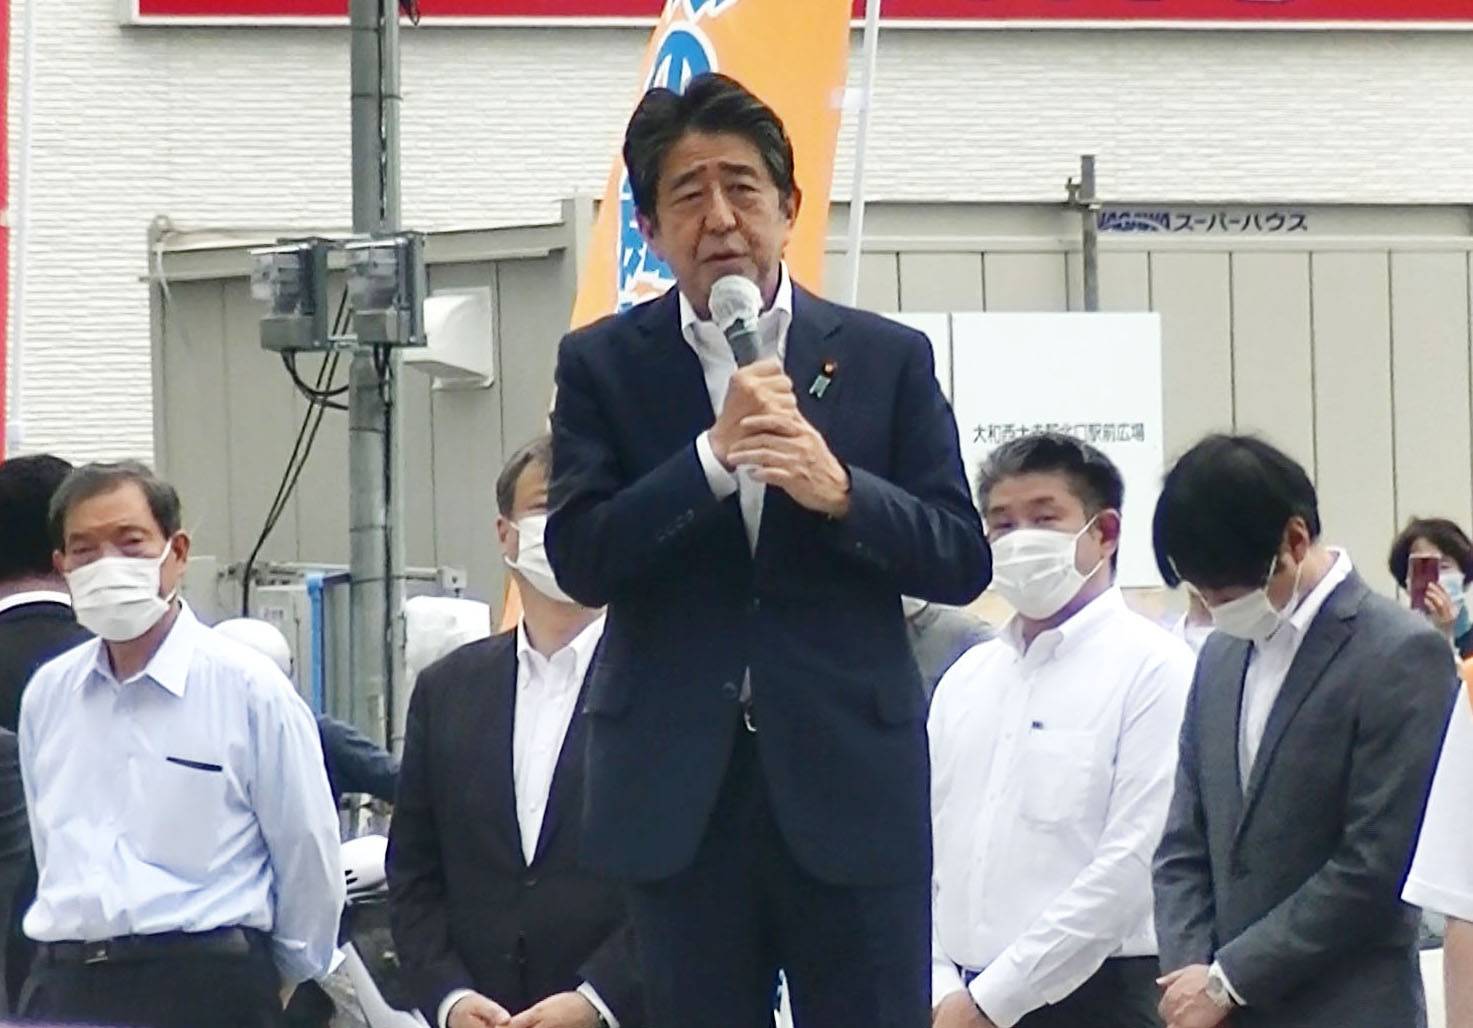 Former Prime Minister Shinzo Abe makes a stump speech in Nara on Friday. He was shot immediately after this picture was taken. | KYODO